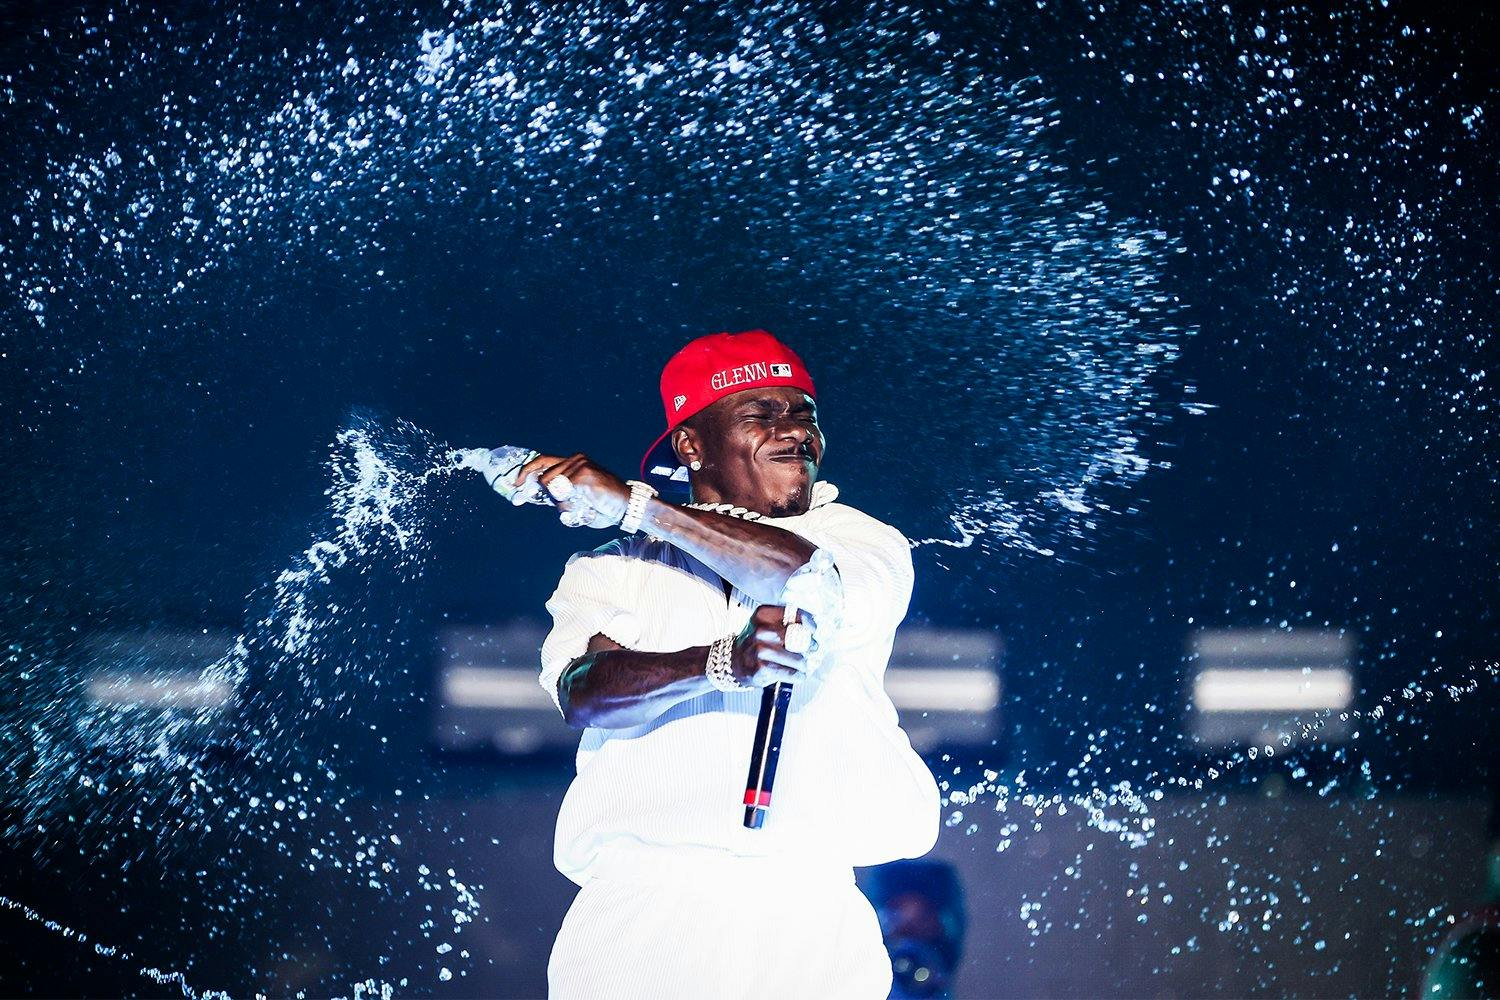 DaBaby performs on stage during Rolling Loud at Hard Rock Stadium on July 25, 2021 in Miami Gardens, Florida. 